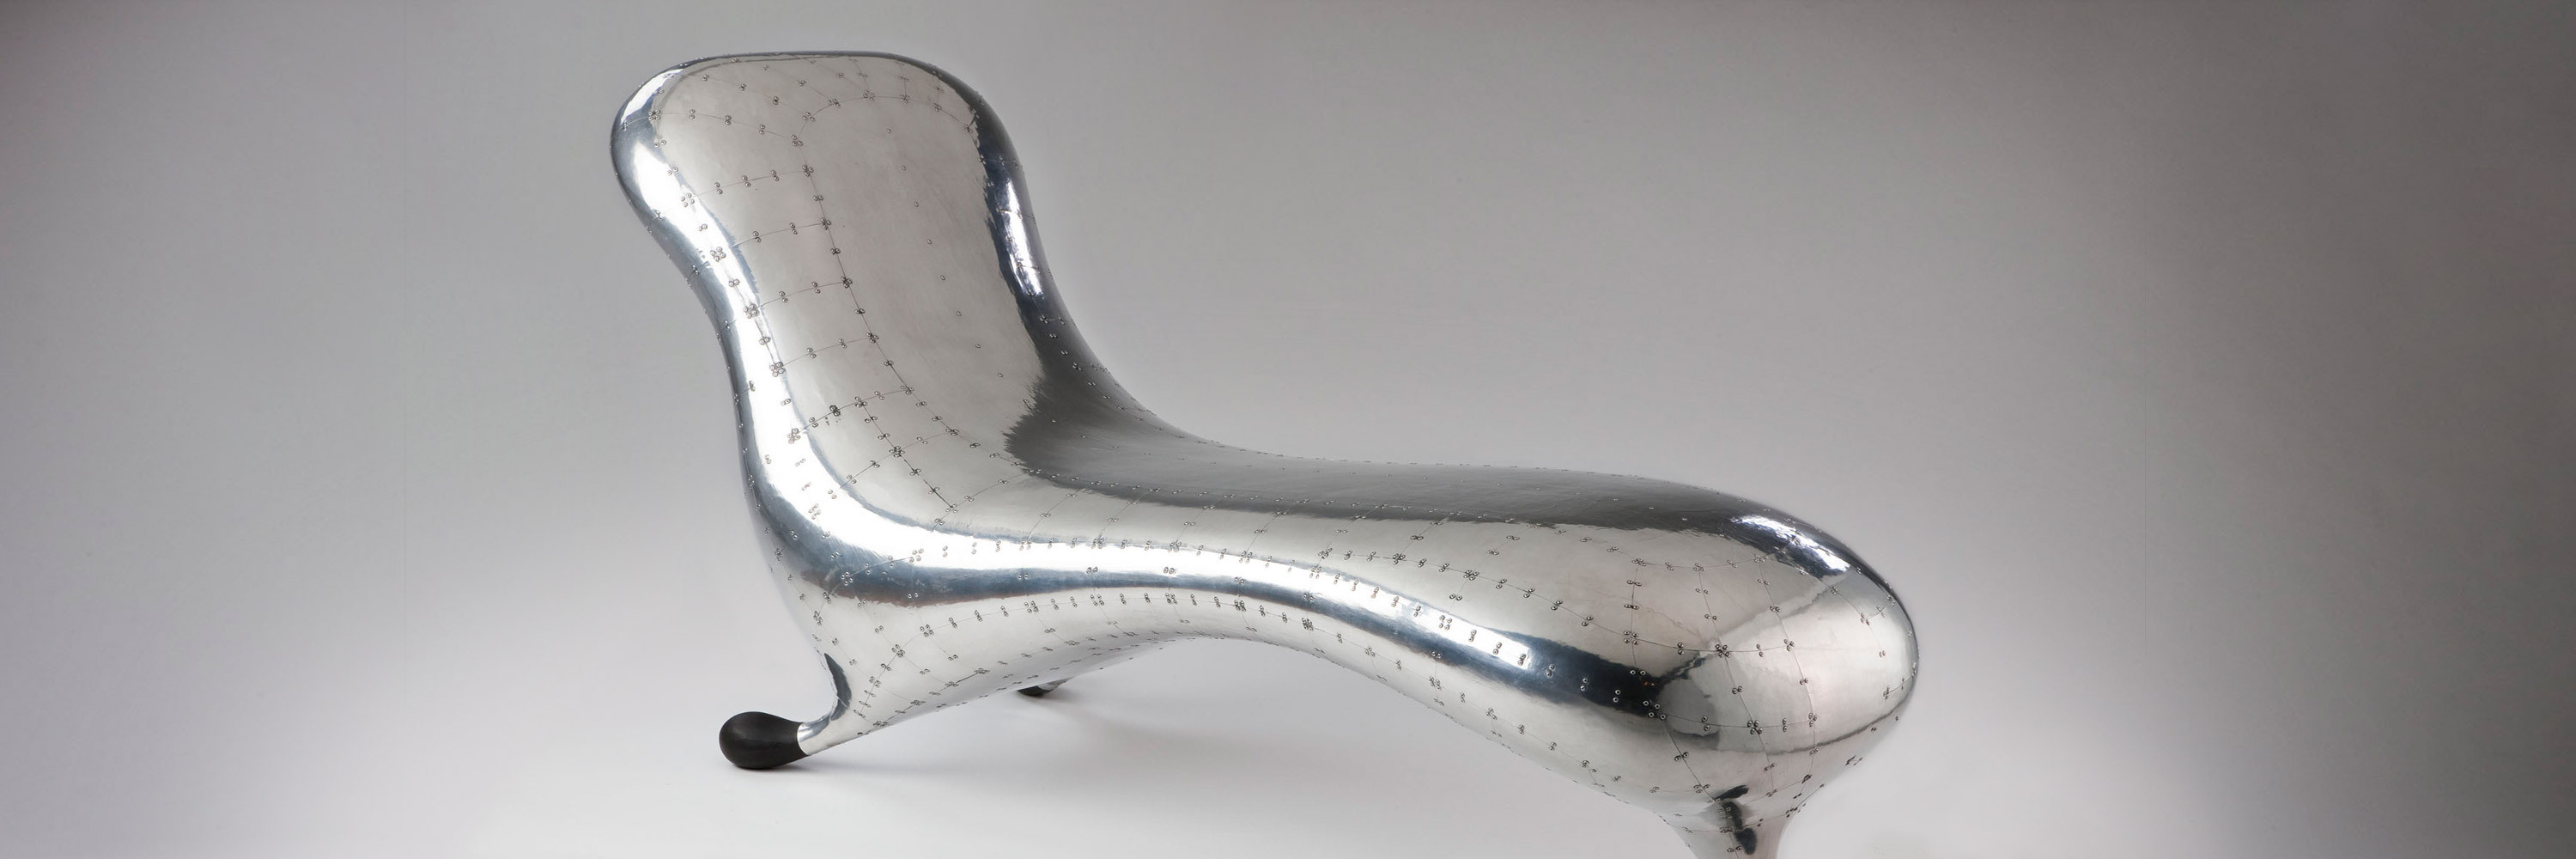 A silver lounge chair with curved, shiny edges and three feet